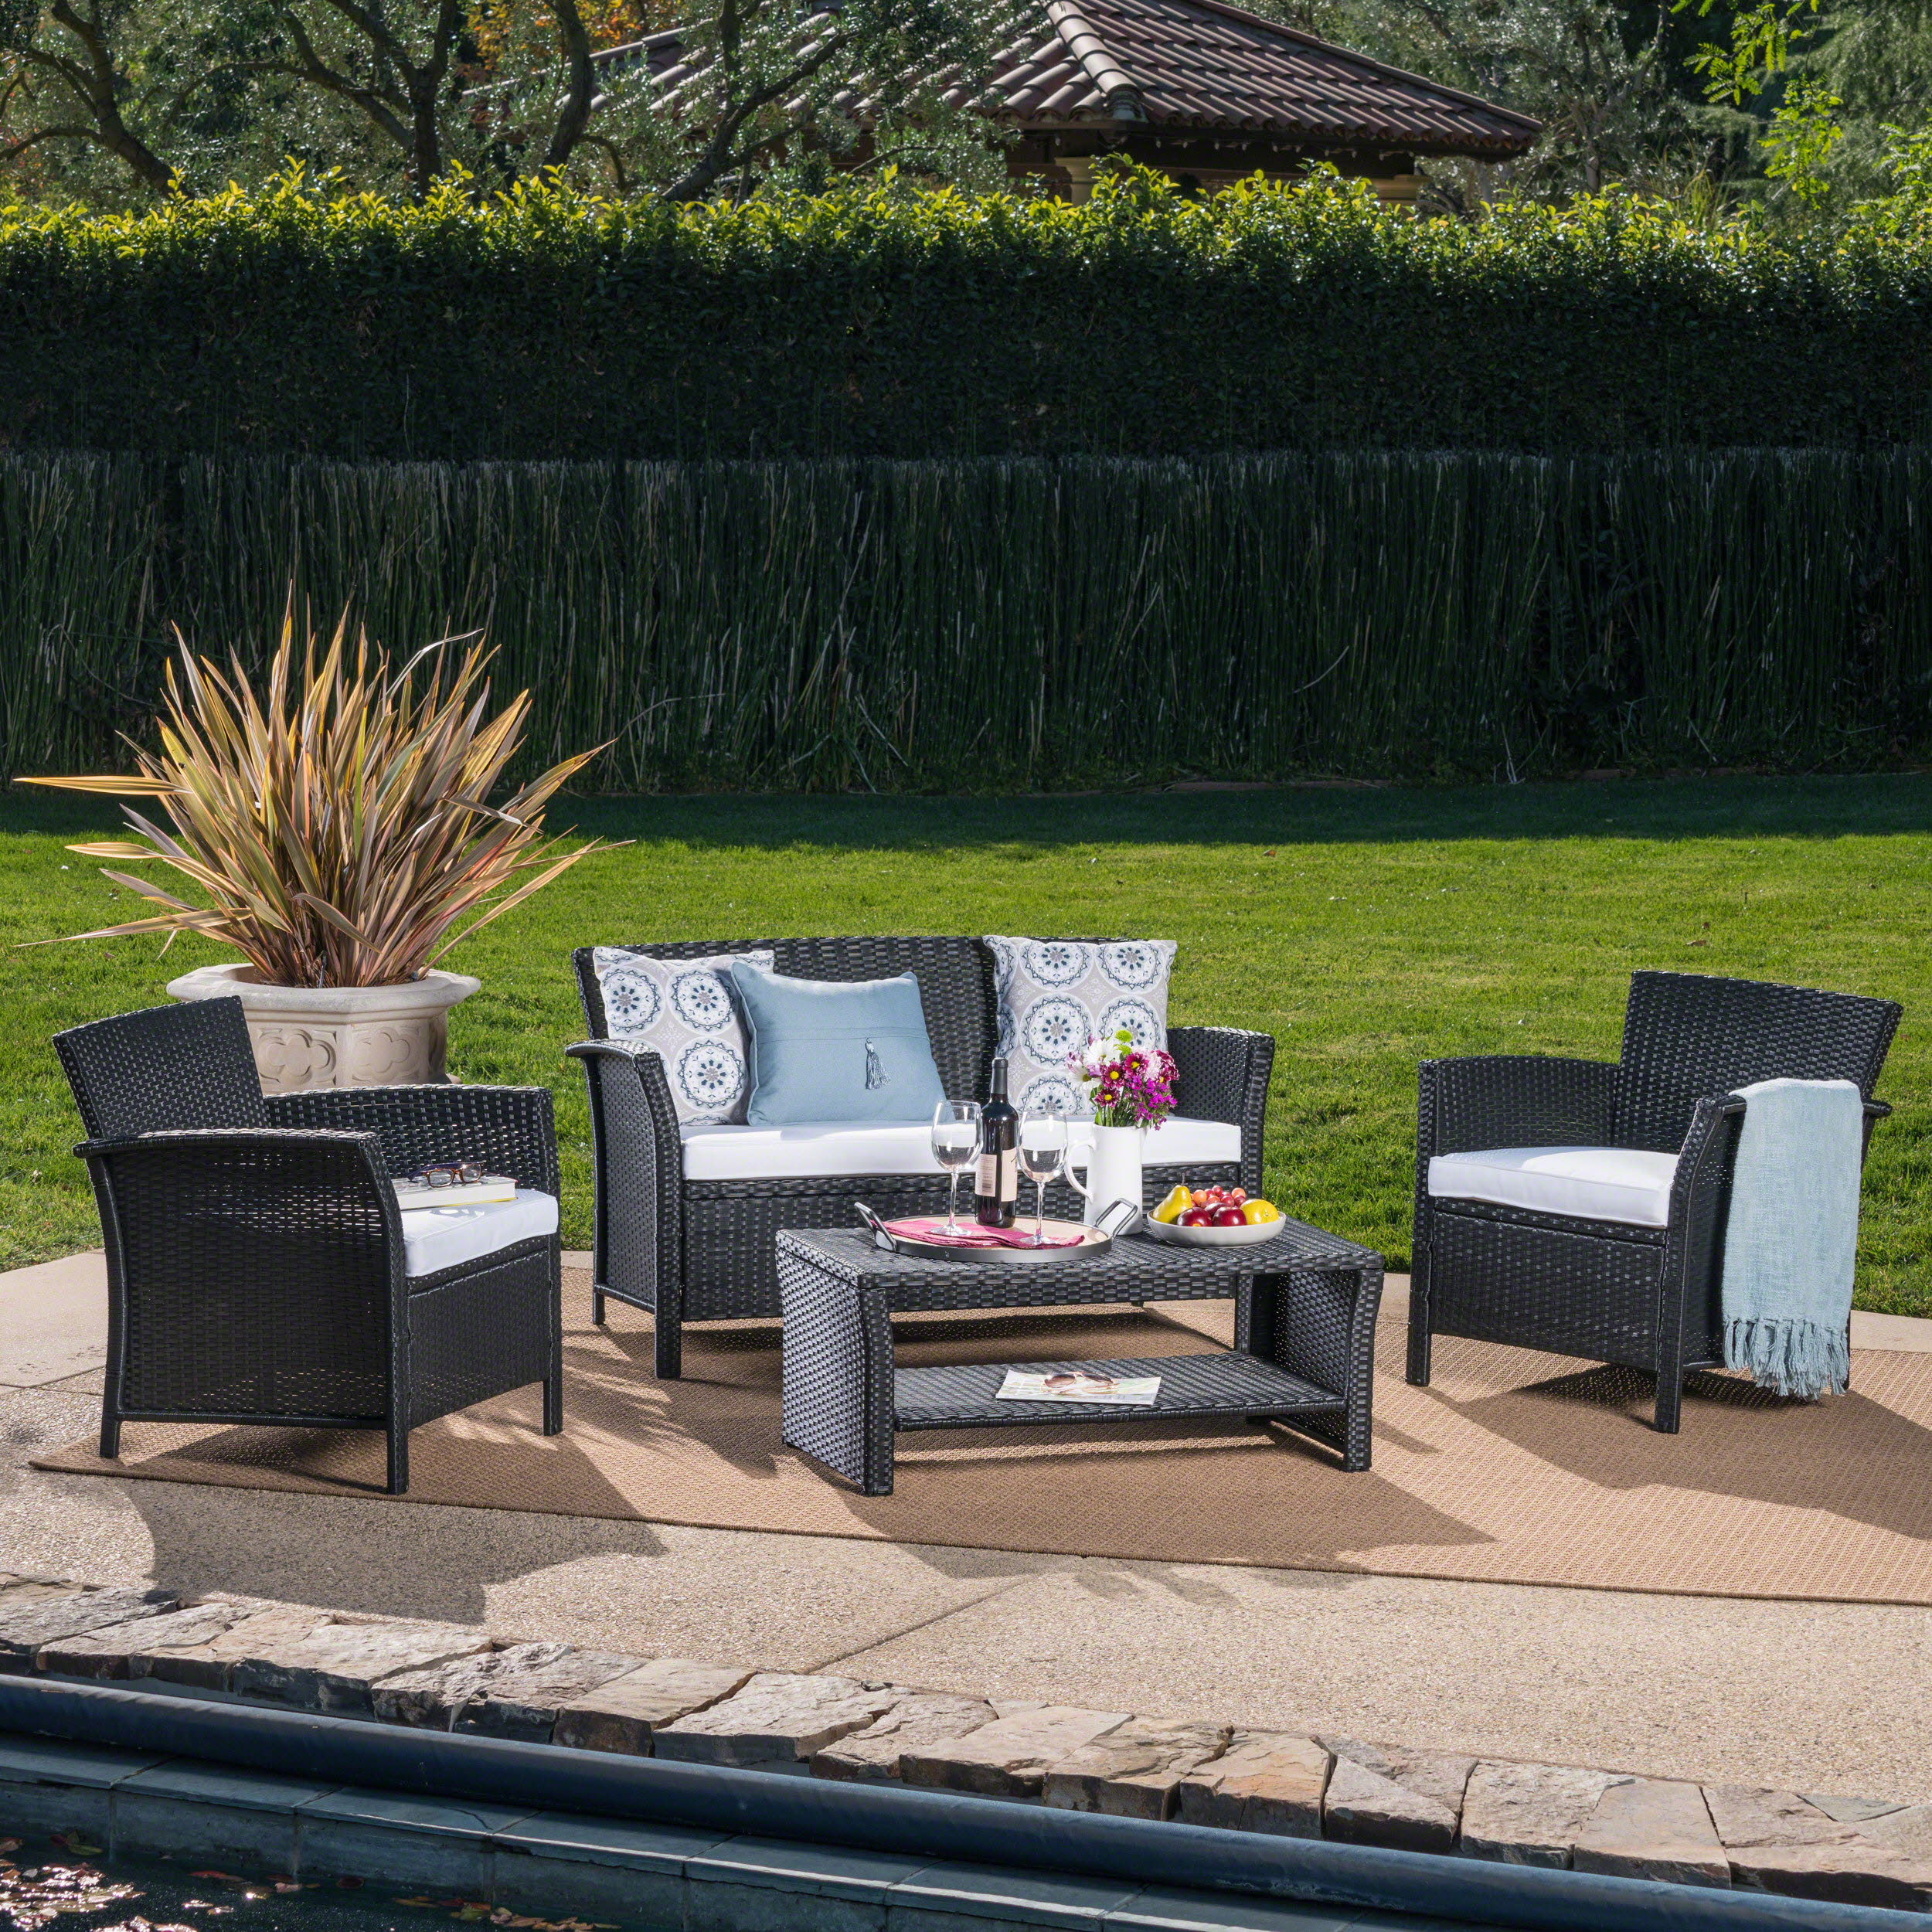 Anton Outdoor 4 Piece Wicker Chat Set with Cushions, Black, White - image 1 of 7